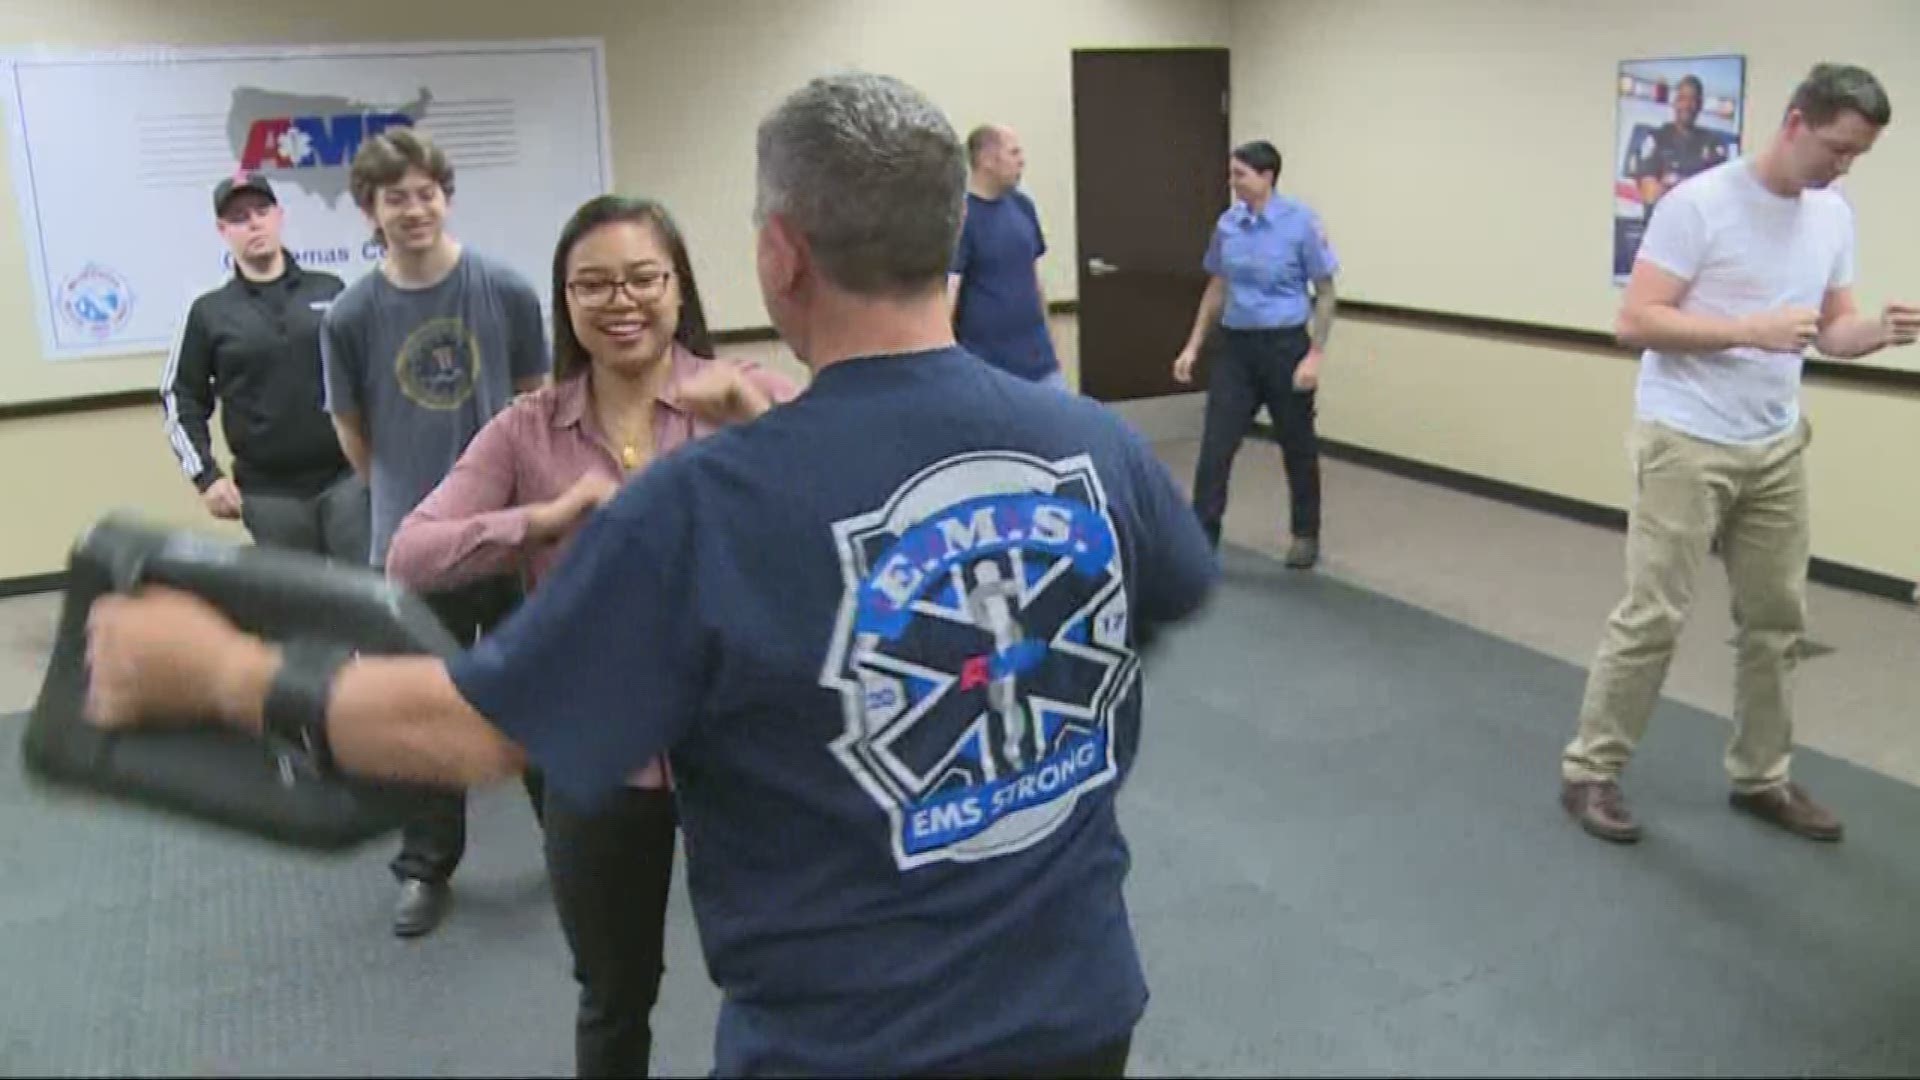 The people tasked with saving lives say, more and more, their lives are being put in danger. So now, paramedics and EMTs have started going through mandatory "self-defense classes."